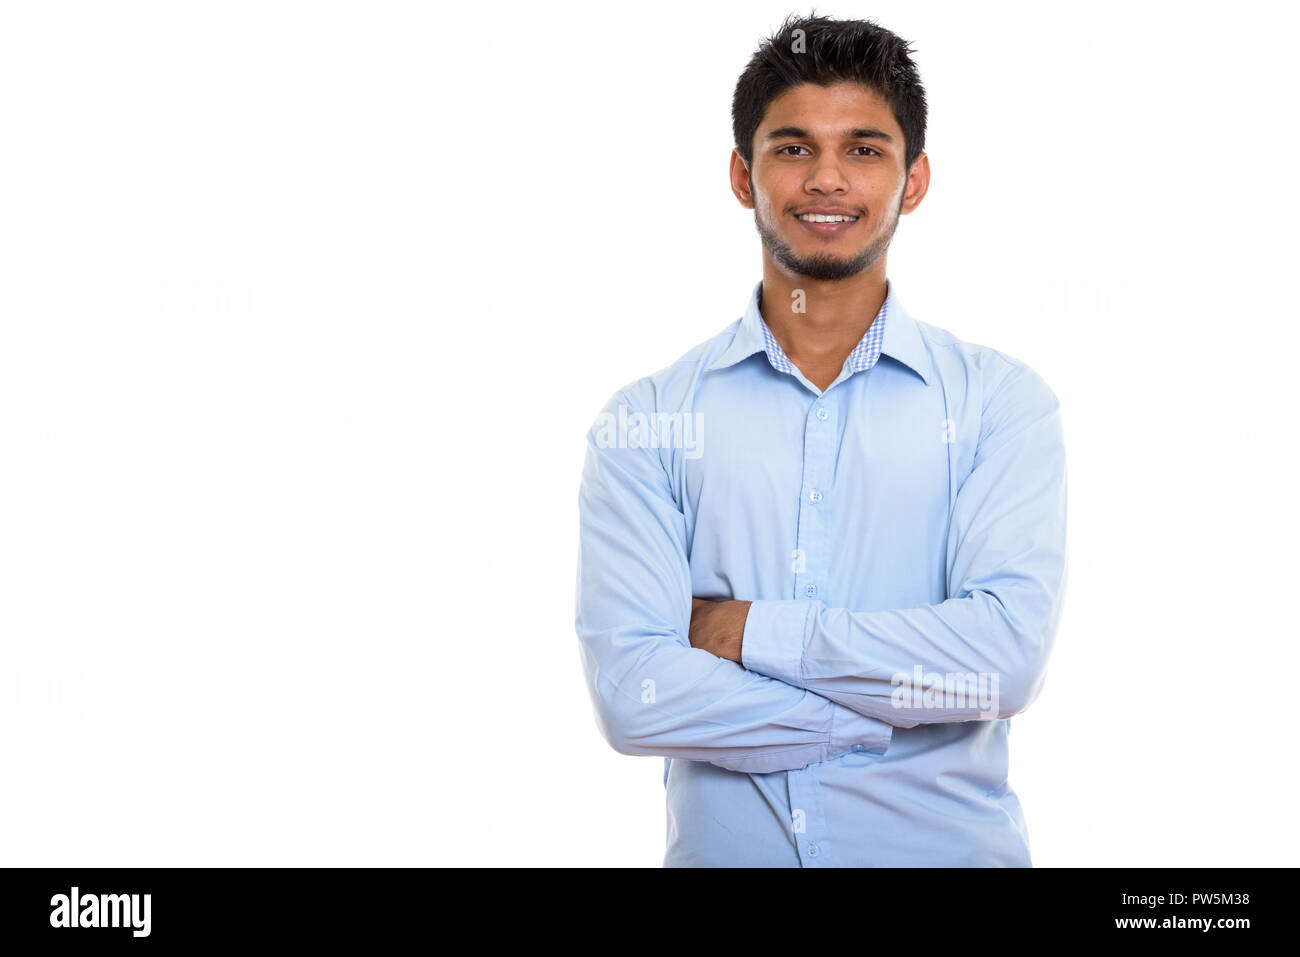 Studio shot of young happy Indian man smiling with arms crossed Banque D'Images